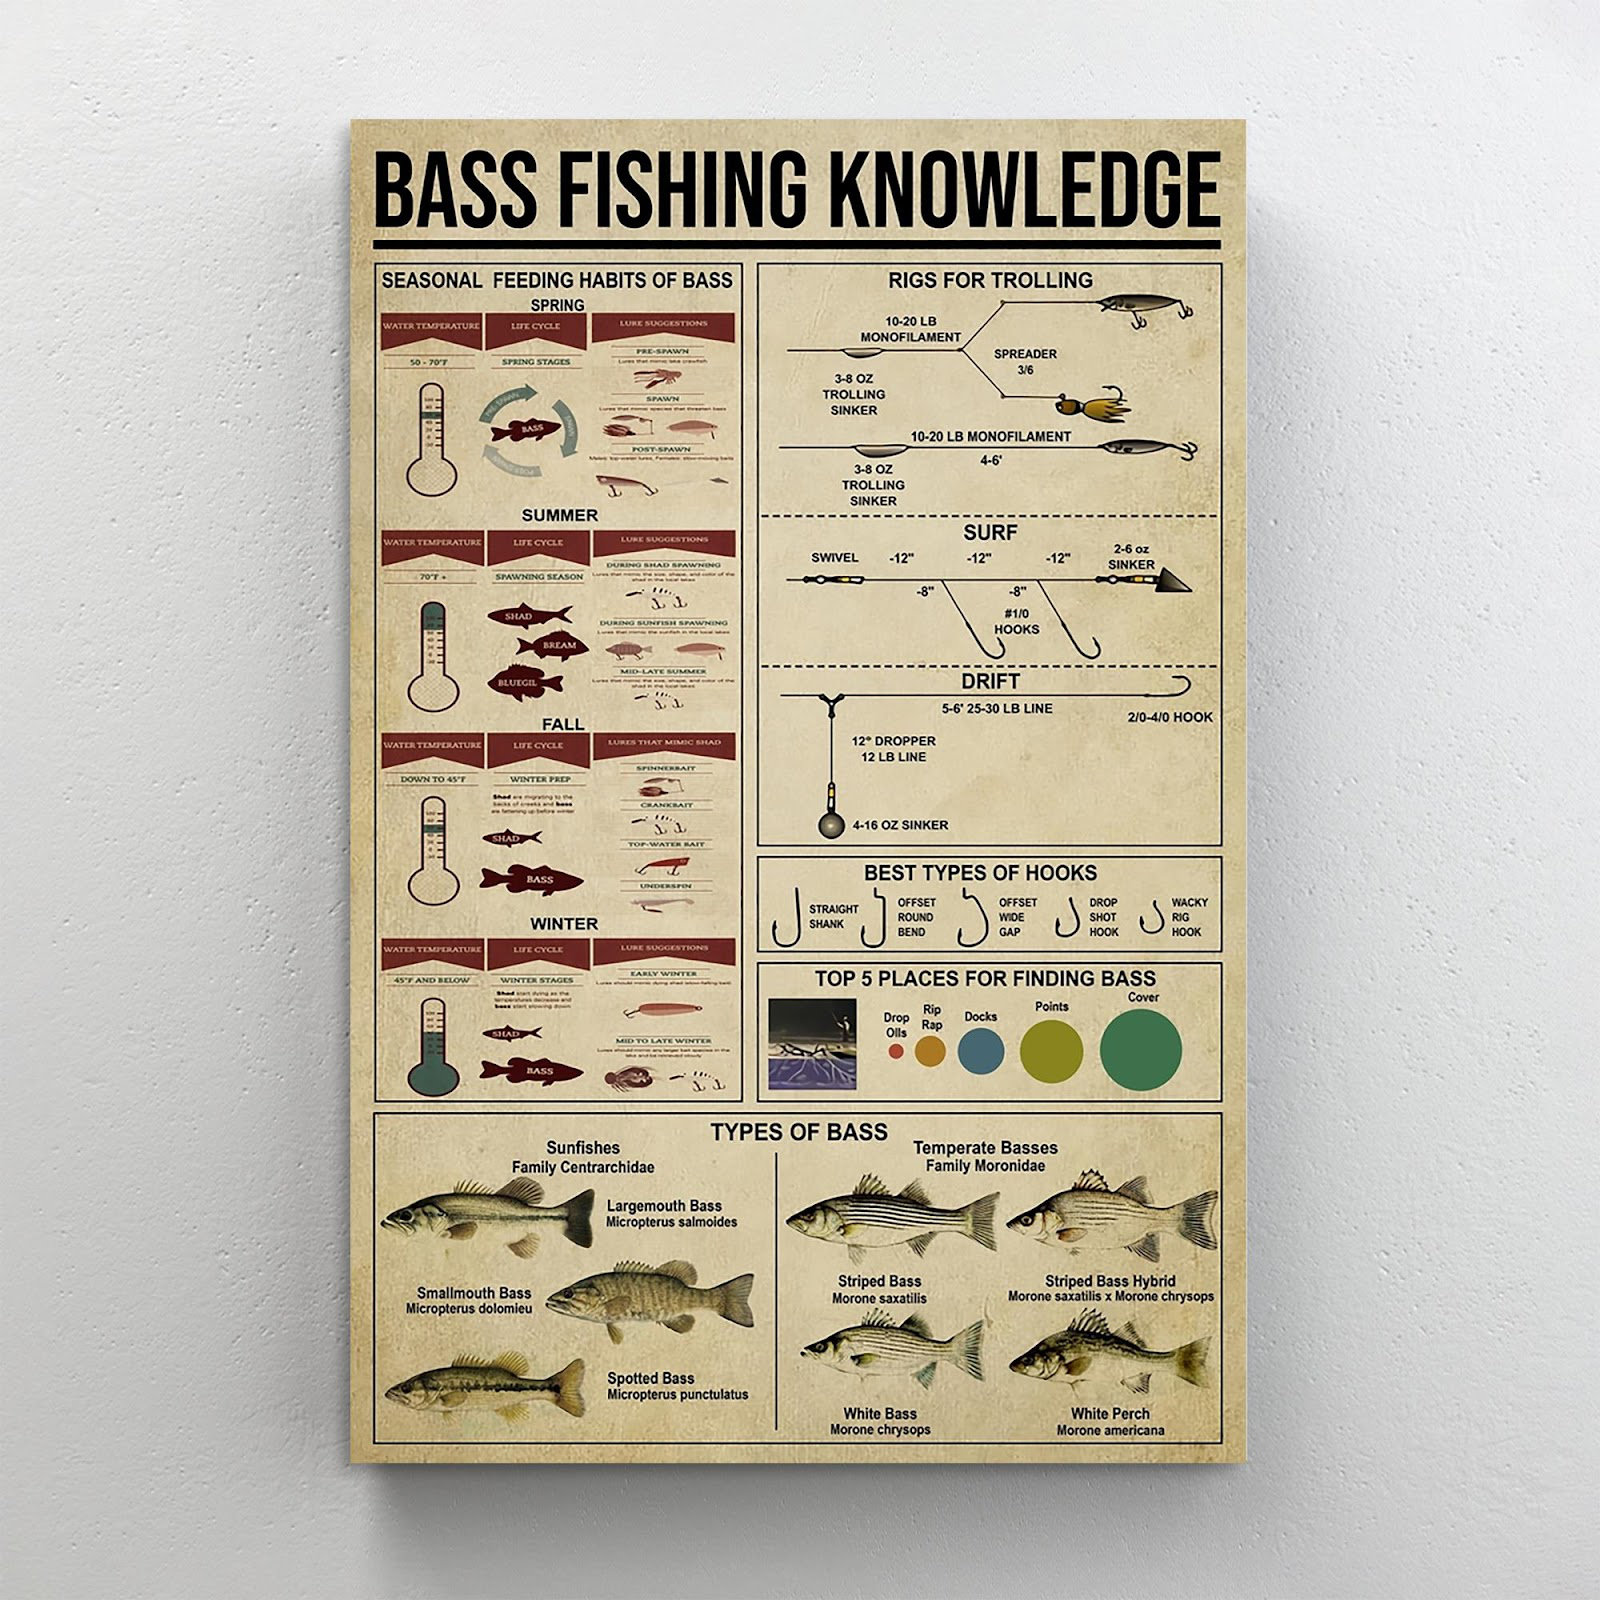 Trinx Bass Fishing Knowledge - 1 Piece Rectangle Graphic Bass